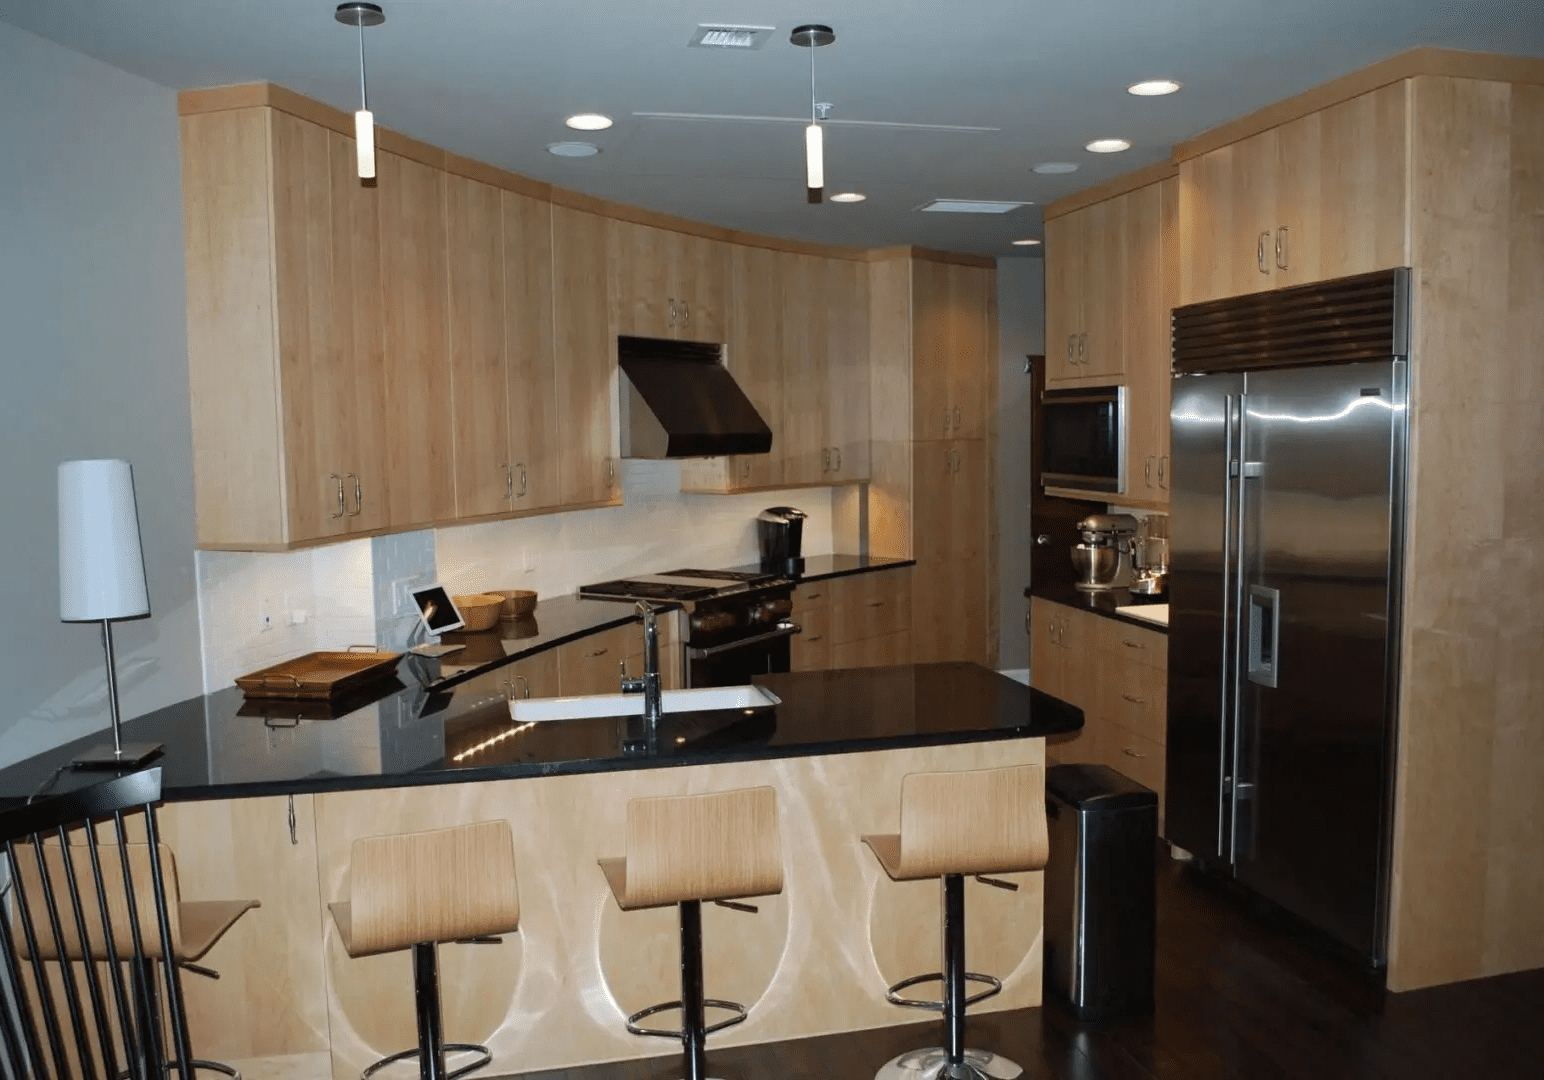 A kitchen with wooden cabinets and black counter tops.